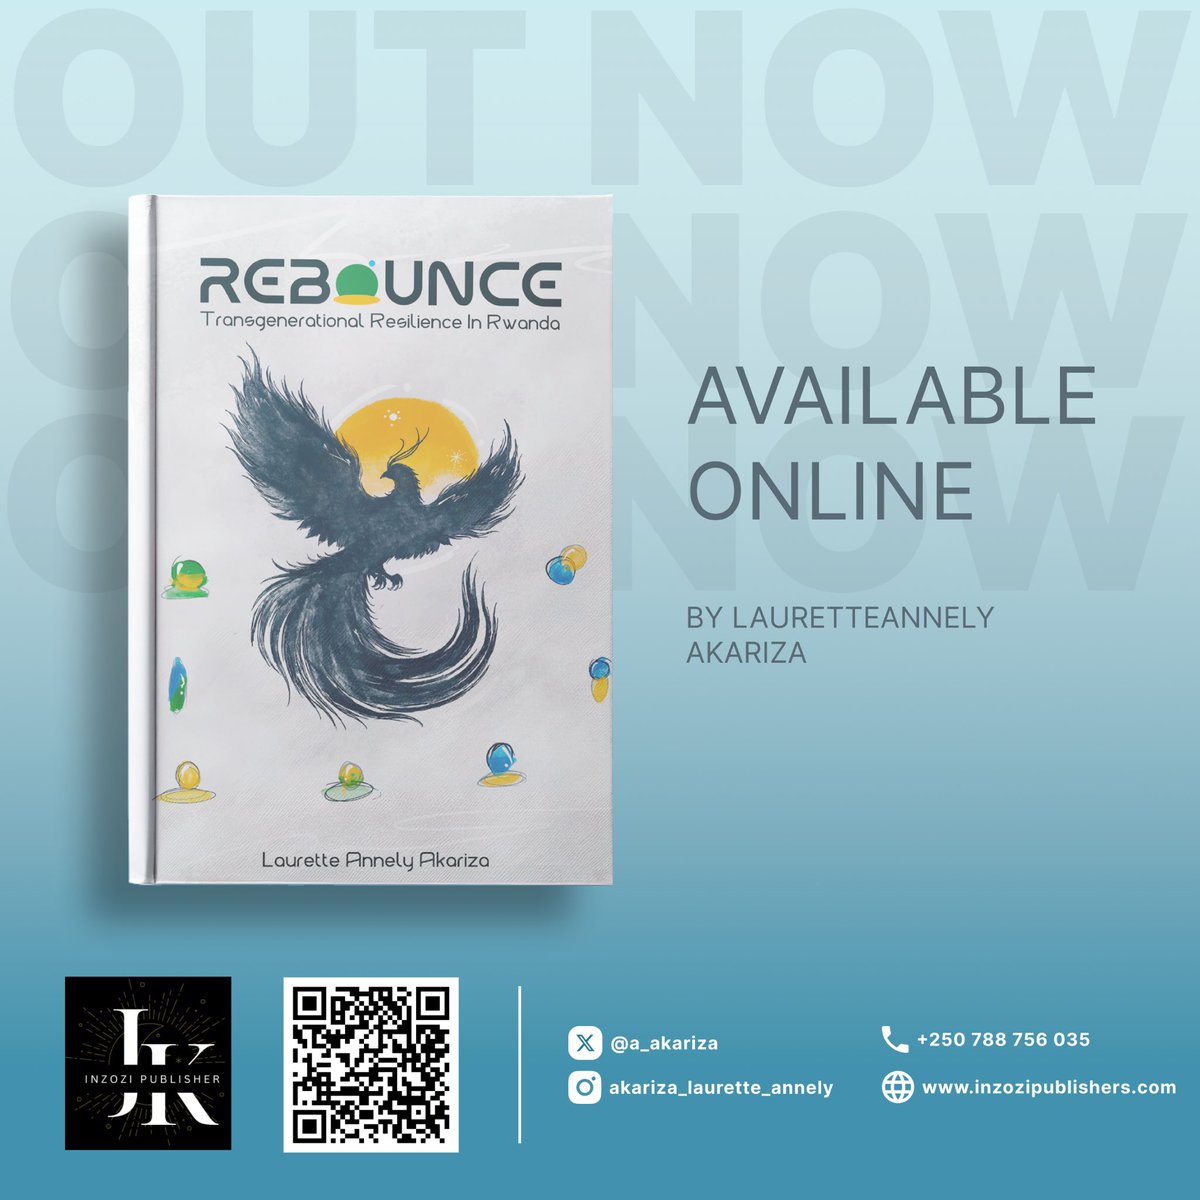 Get your copy of #Rebounce online before the big launch! Let's celebrate Rwanda's incredible bounce-back over the past 30 years together. Don't miss out!🥳🥳 #RebounceBookLaunch